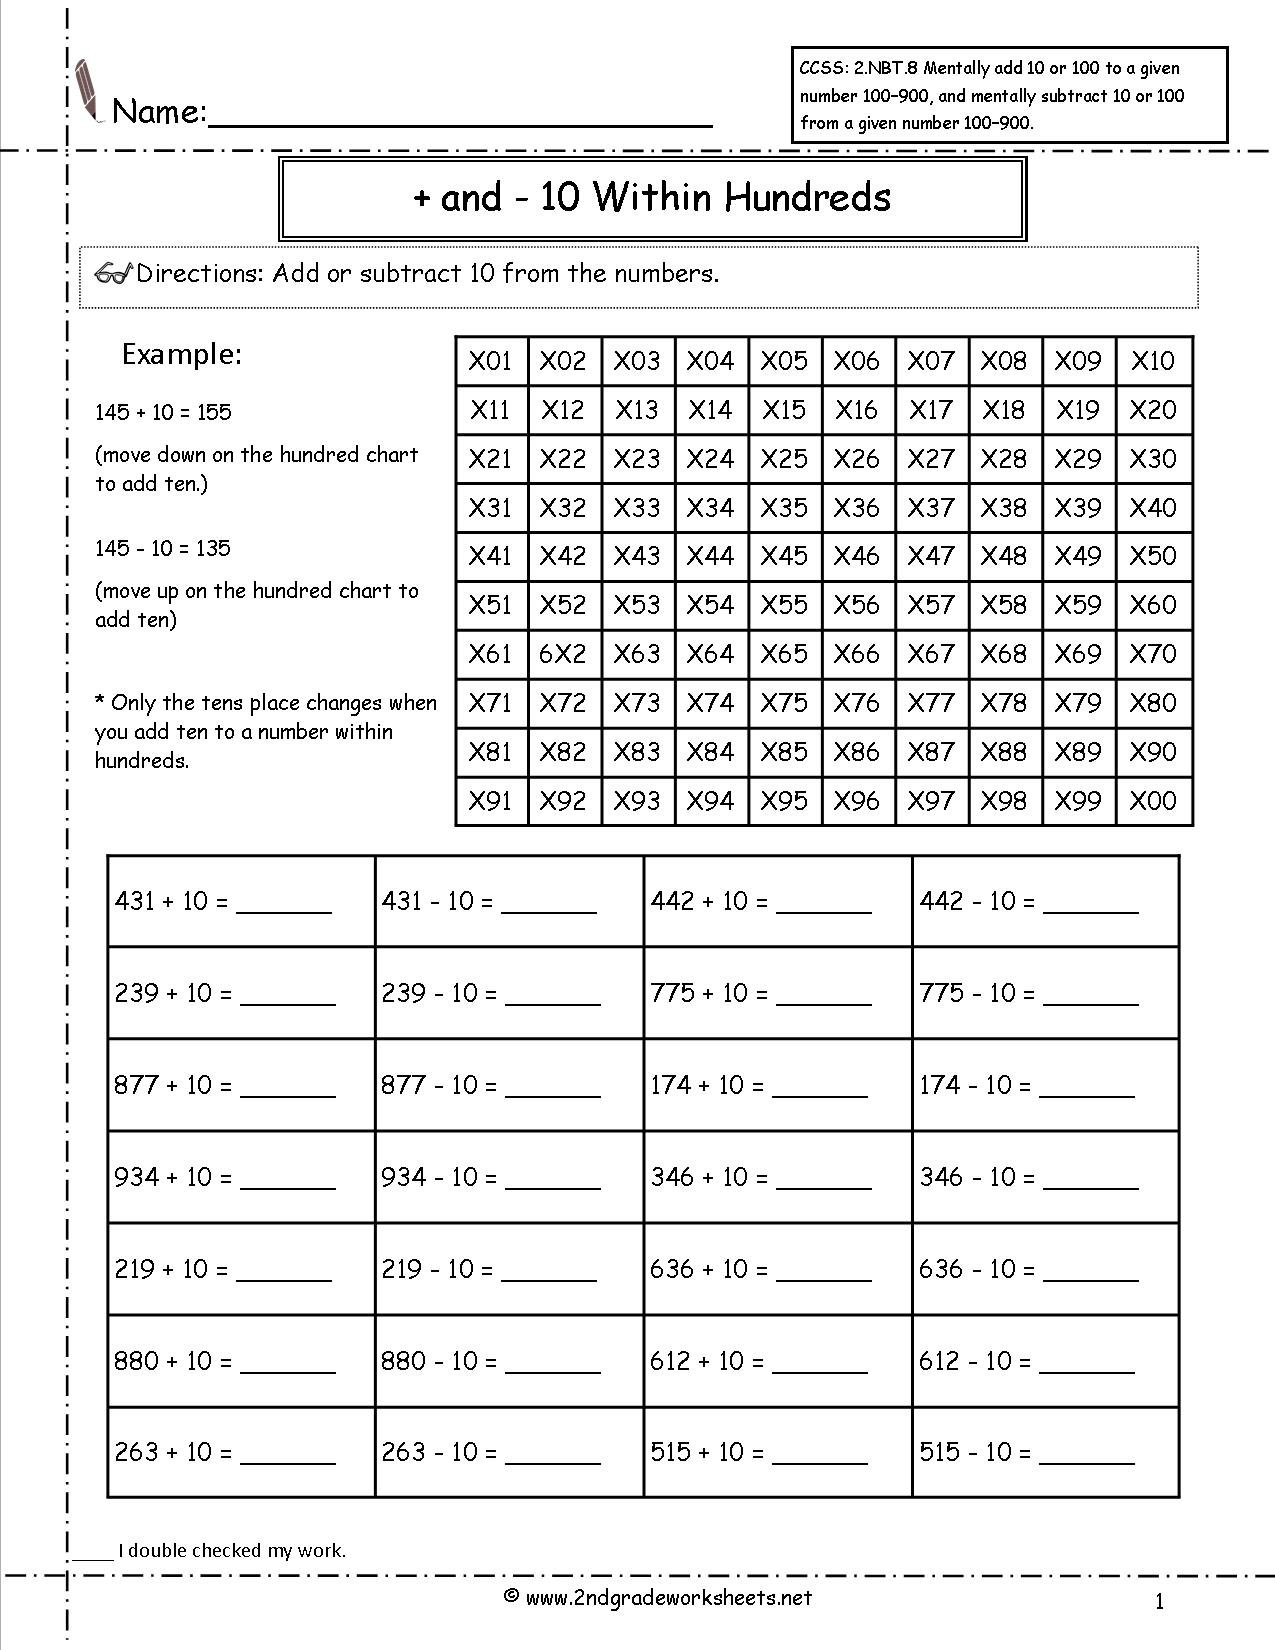 2Nd Grade Math Common Core State Standards Worksheets Intended For Number And Operations In Base Ten Grade 4 Worksheets